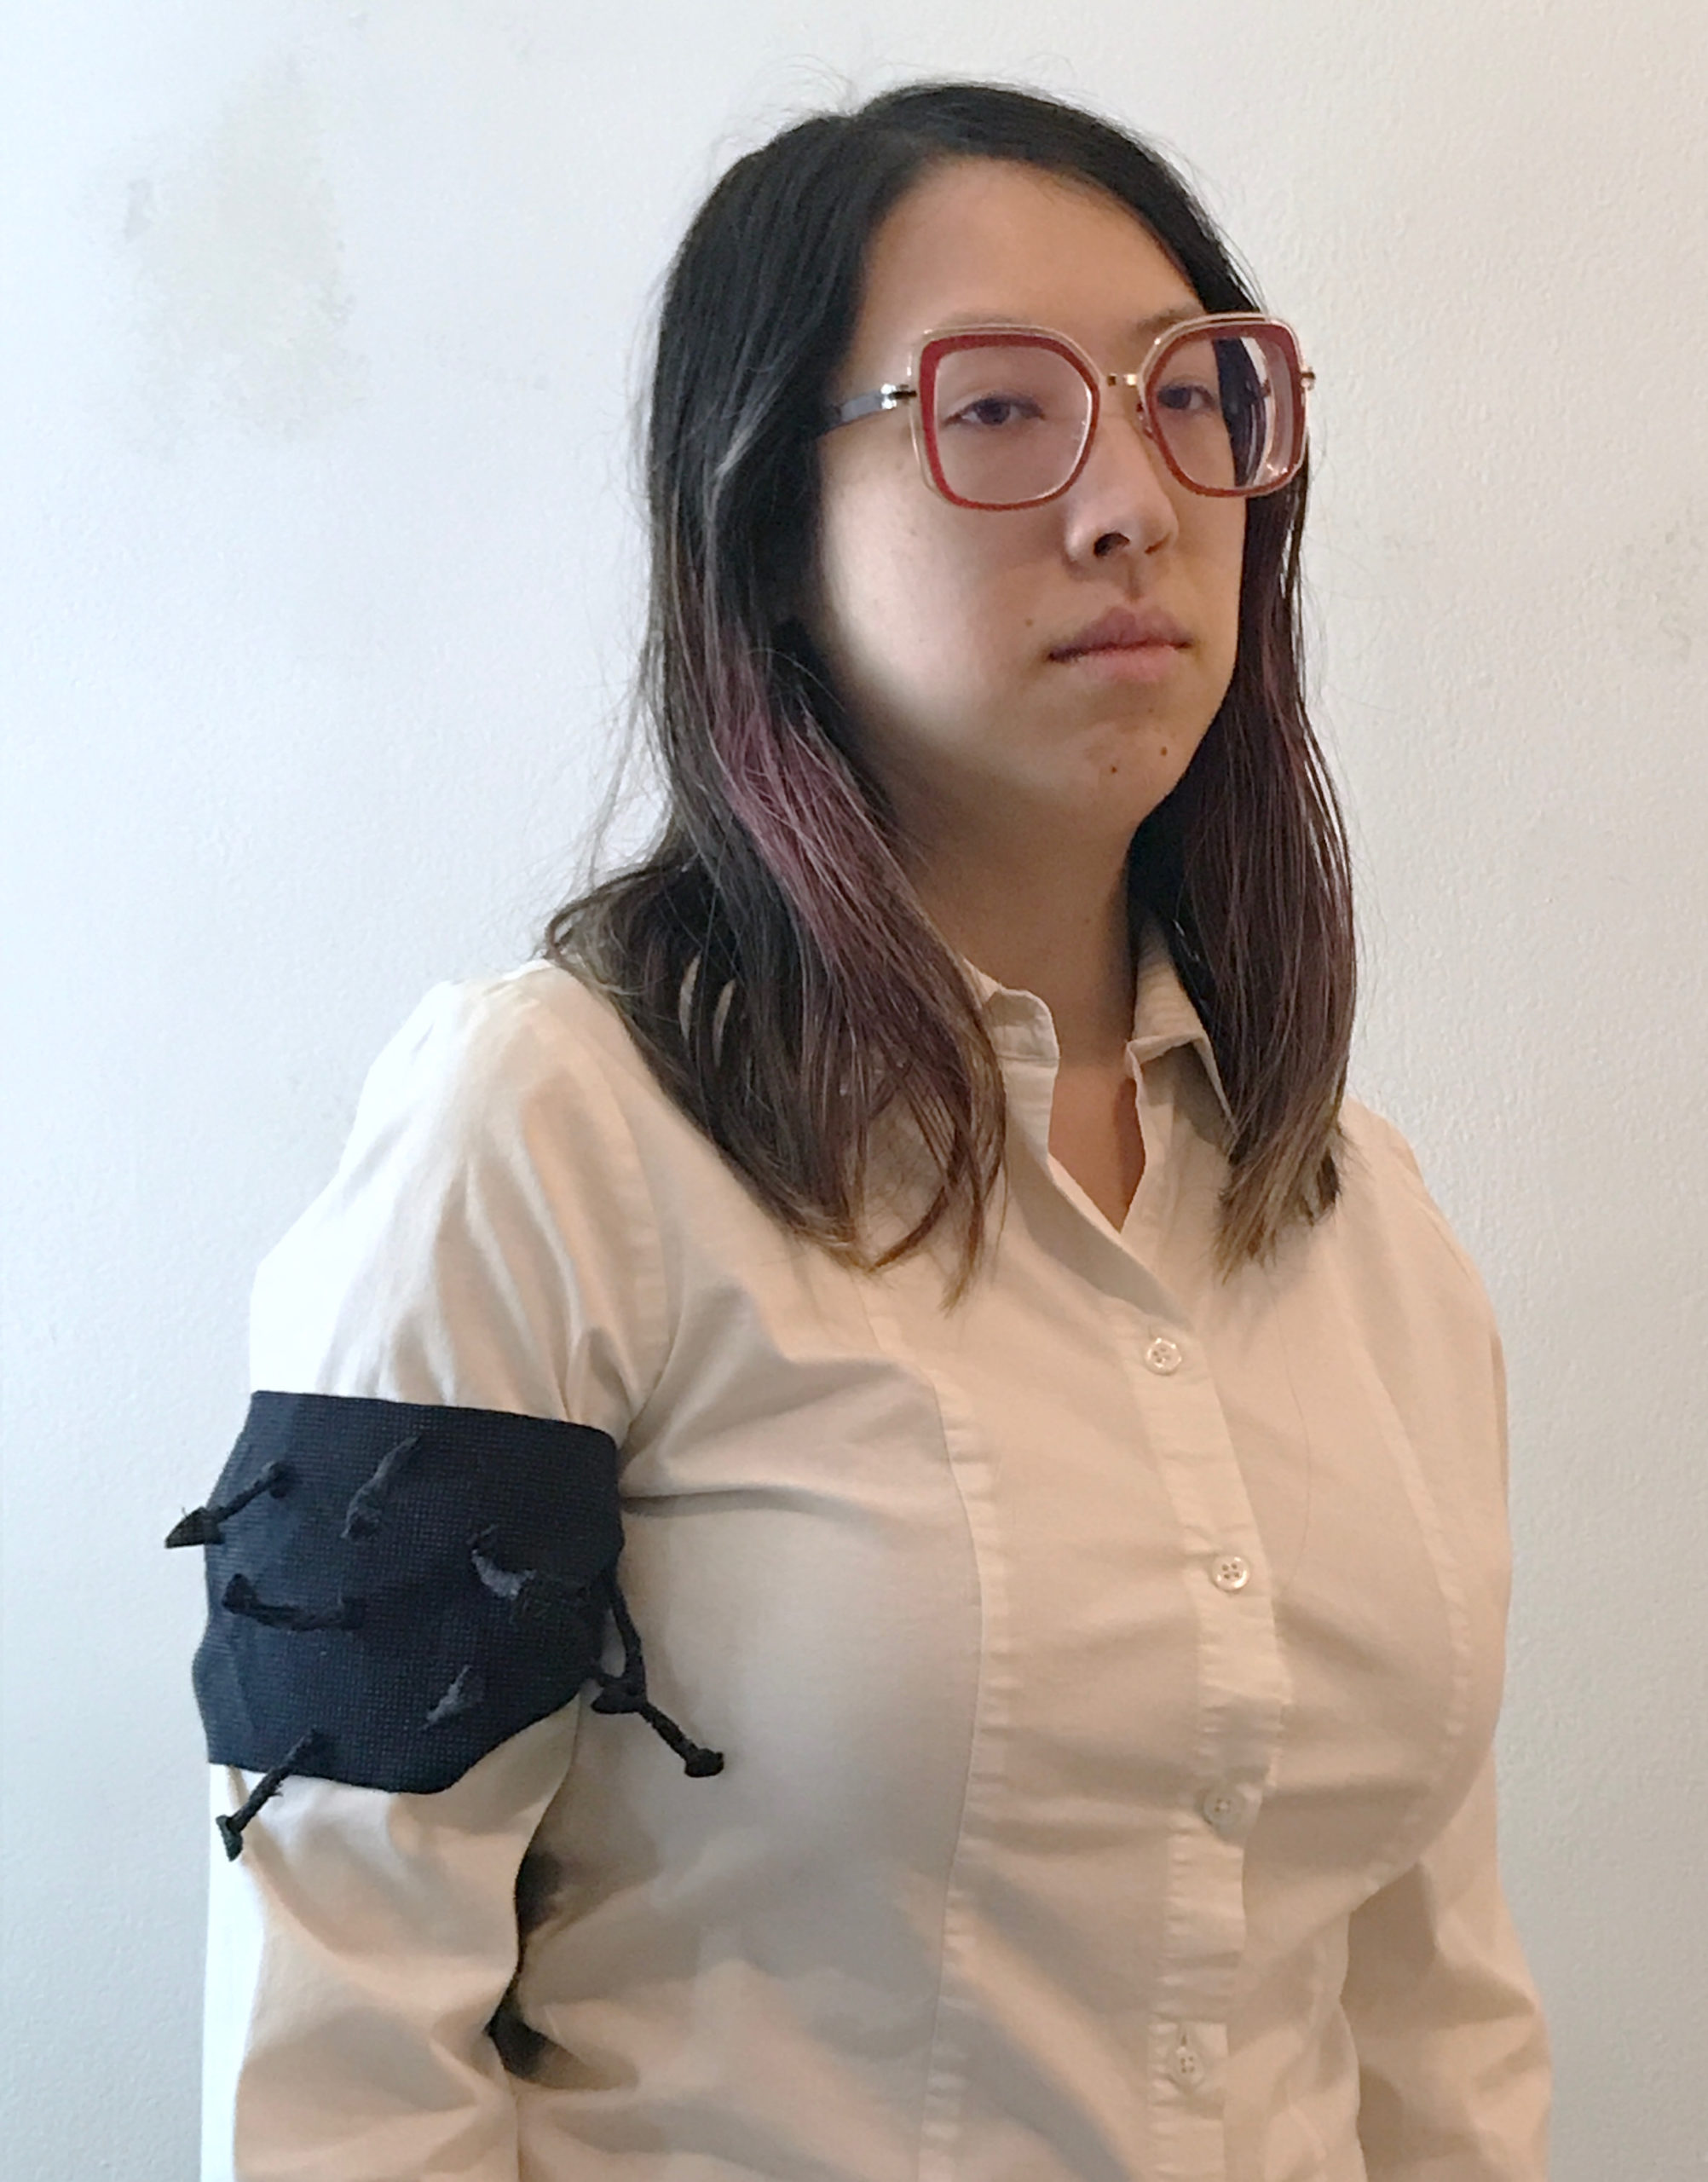 a picture of a woman staring blankly into space, wearing a white shirt with a dark armband that has spikes shooting out of it